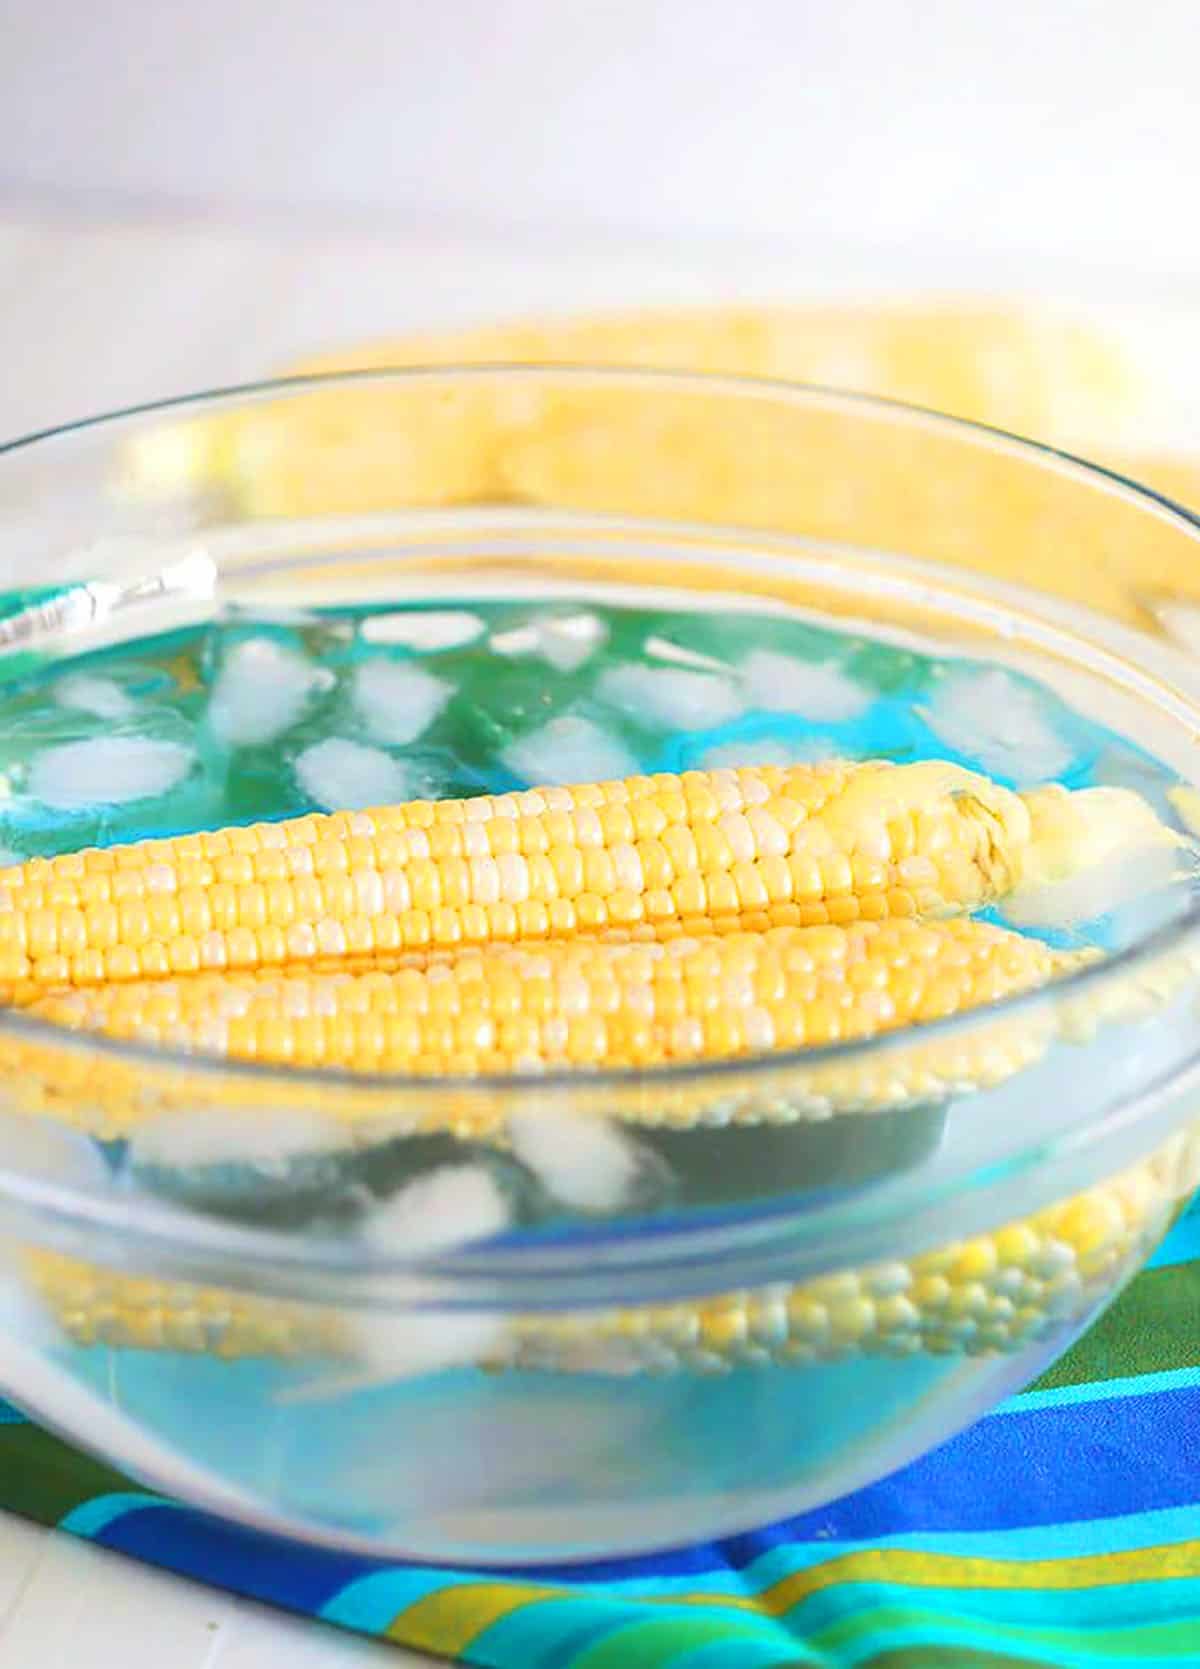 blanching corn on the cob in a glass bowl.